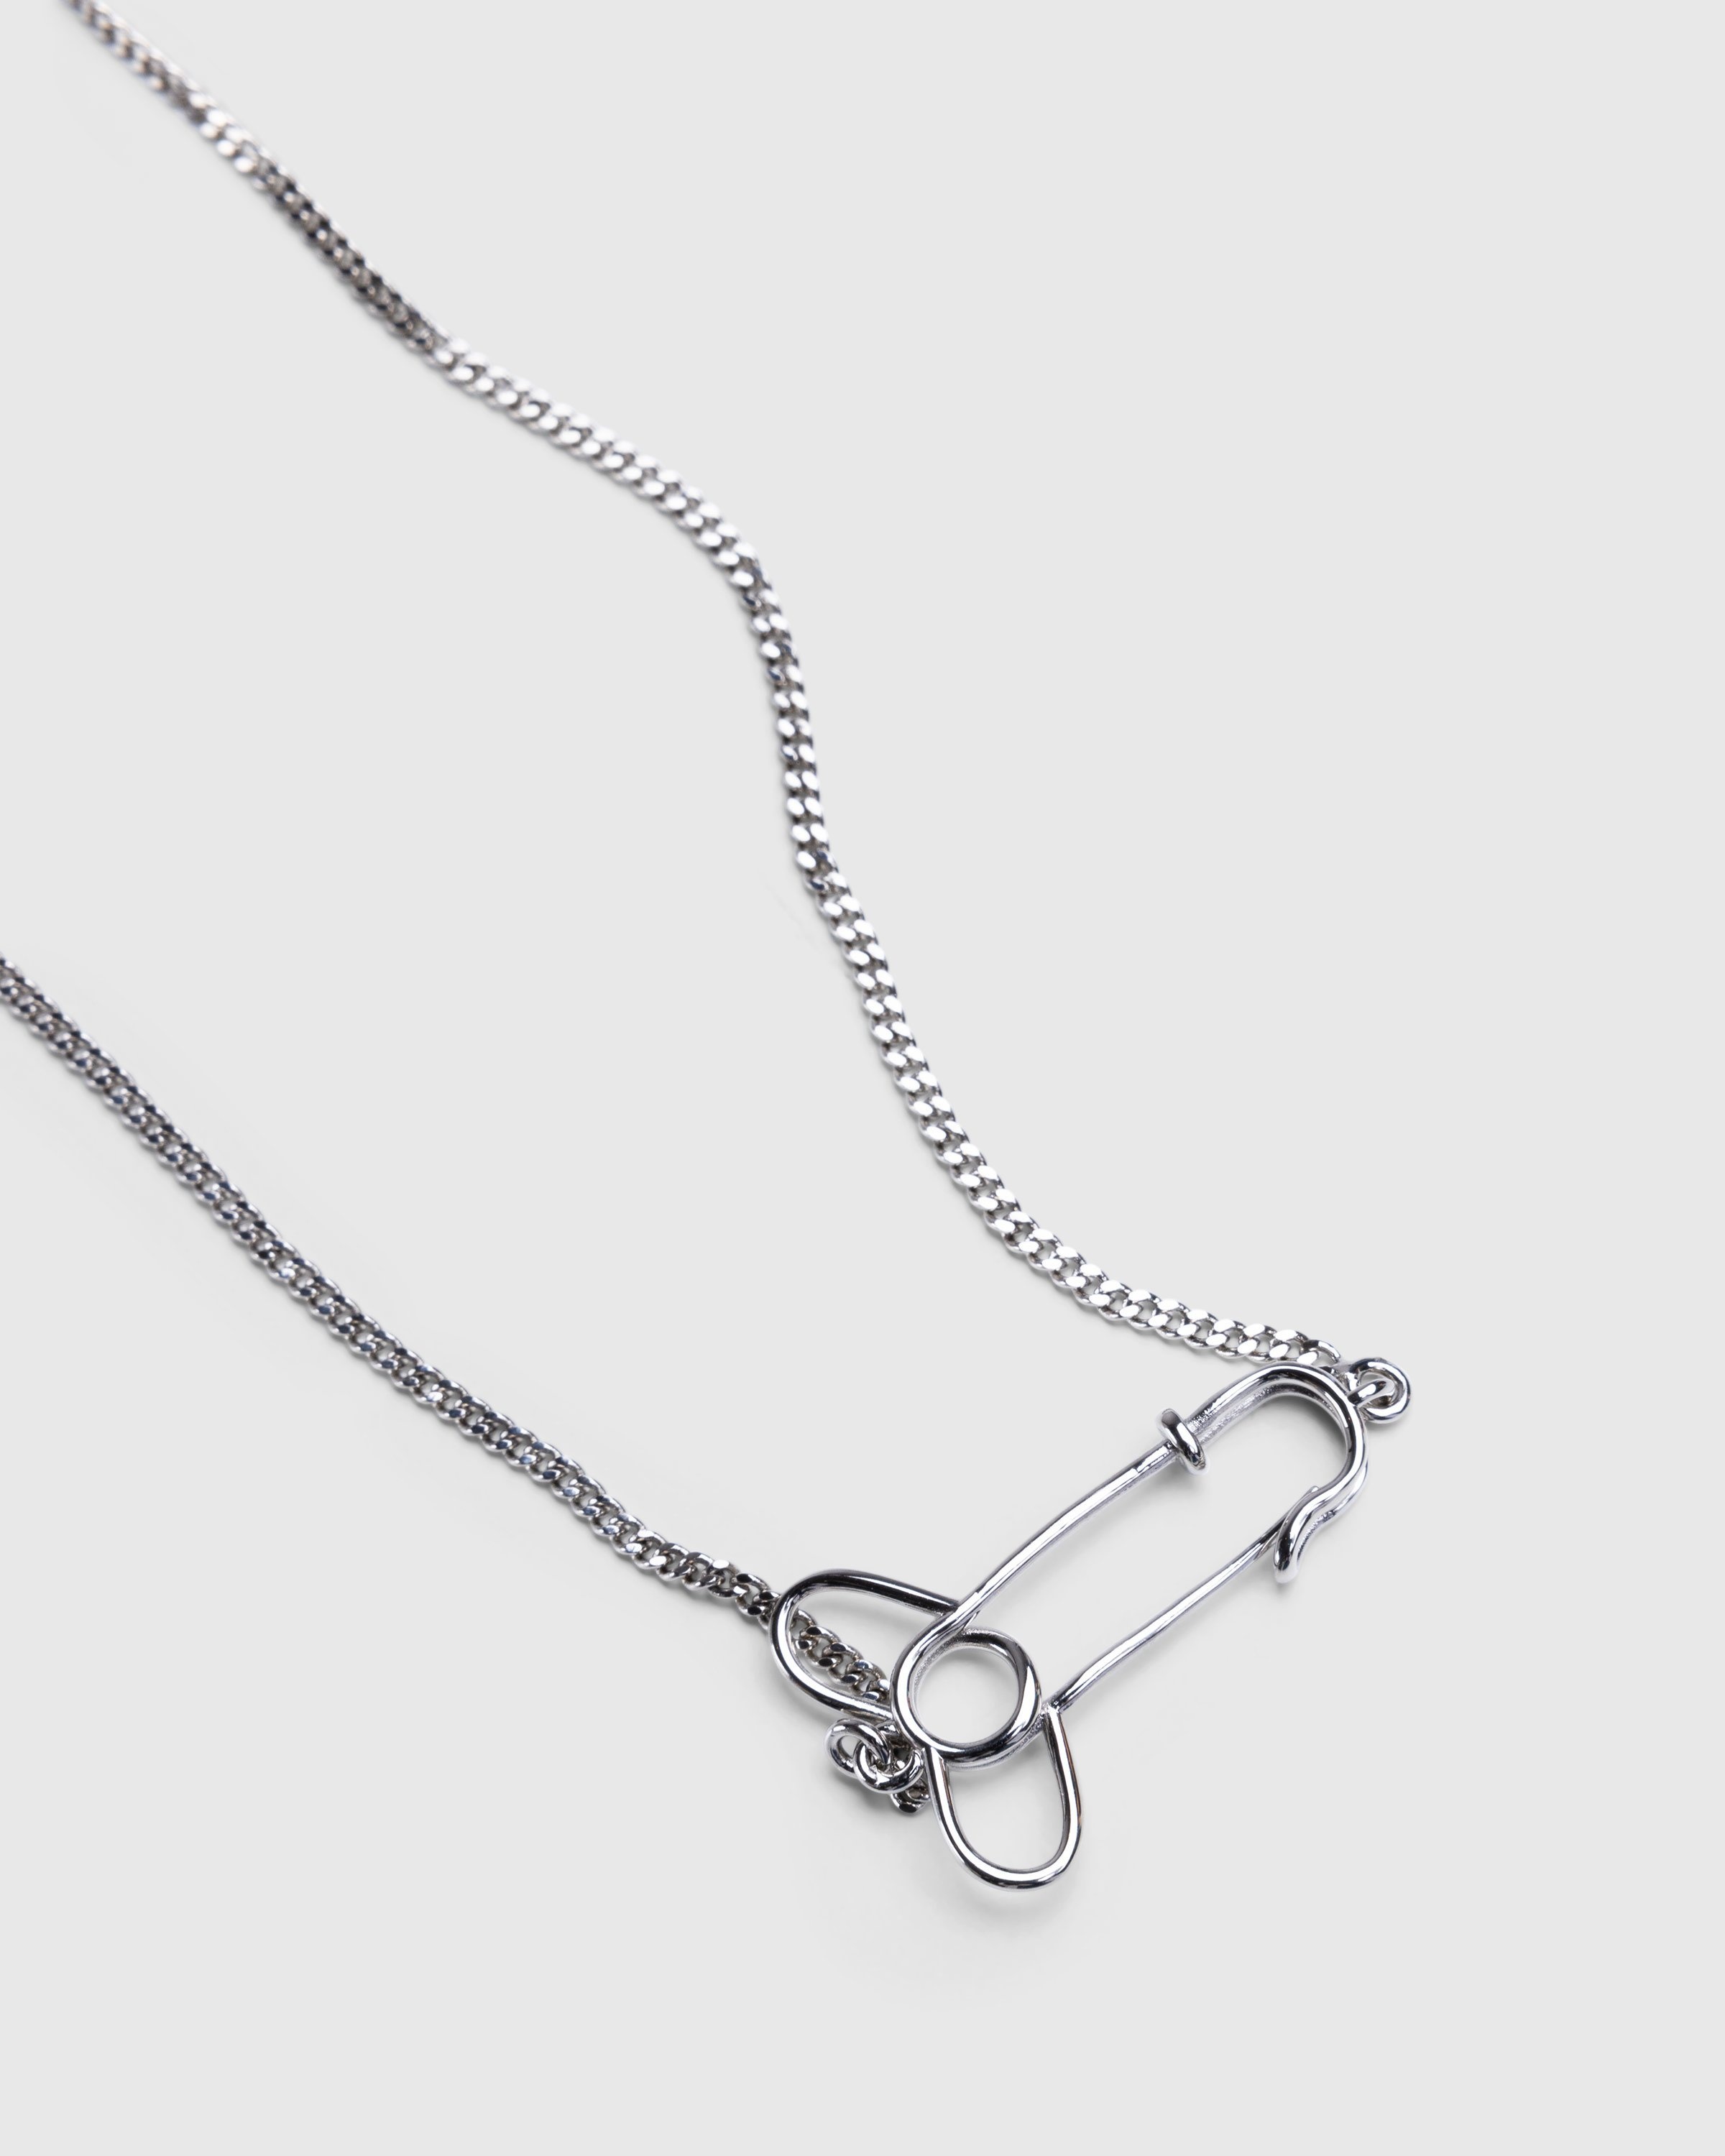 J.W. Anderson – PENIS PIN PENDANT NECKLACE Silver